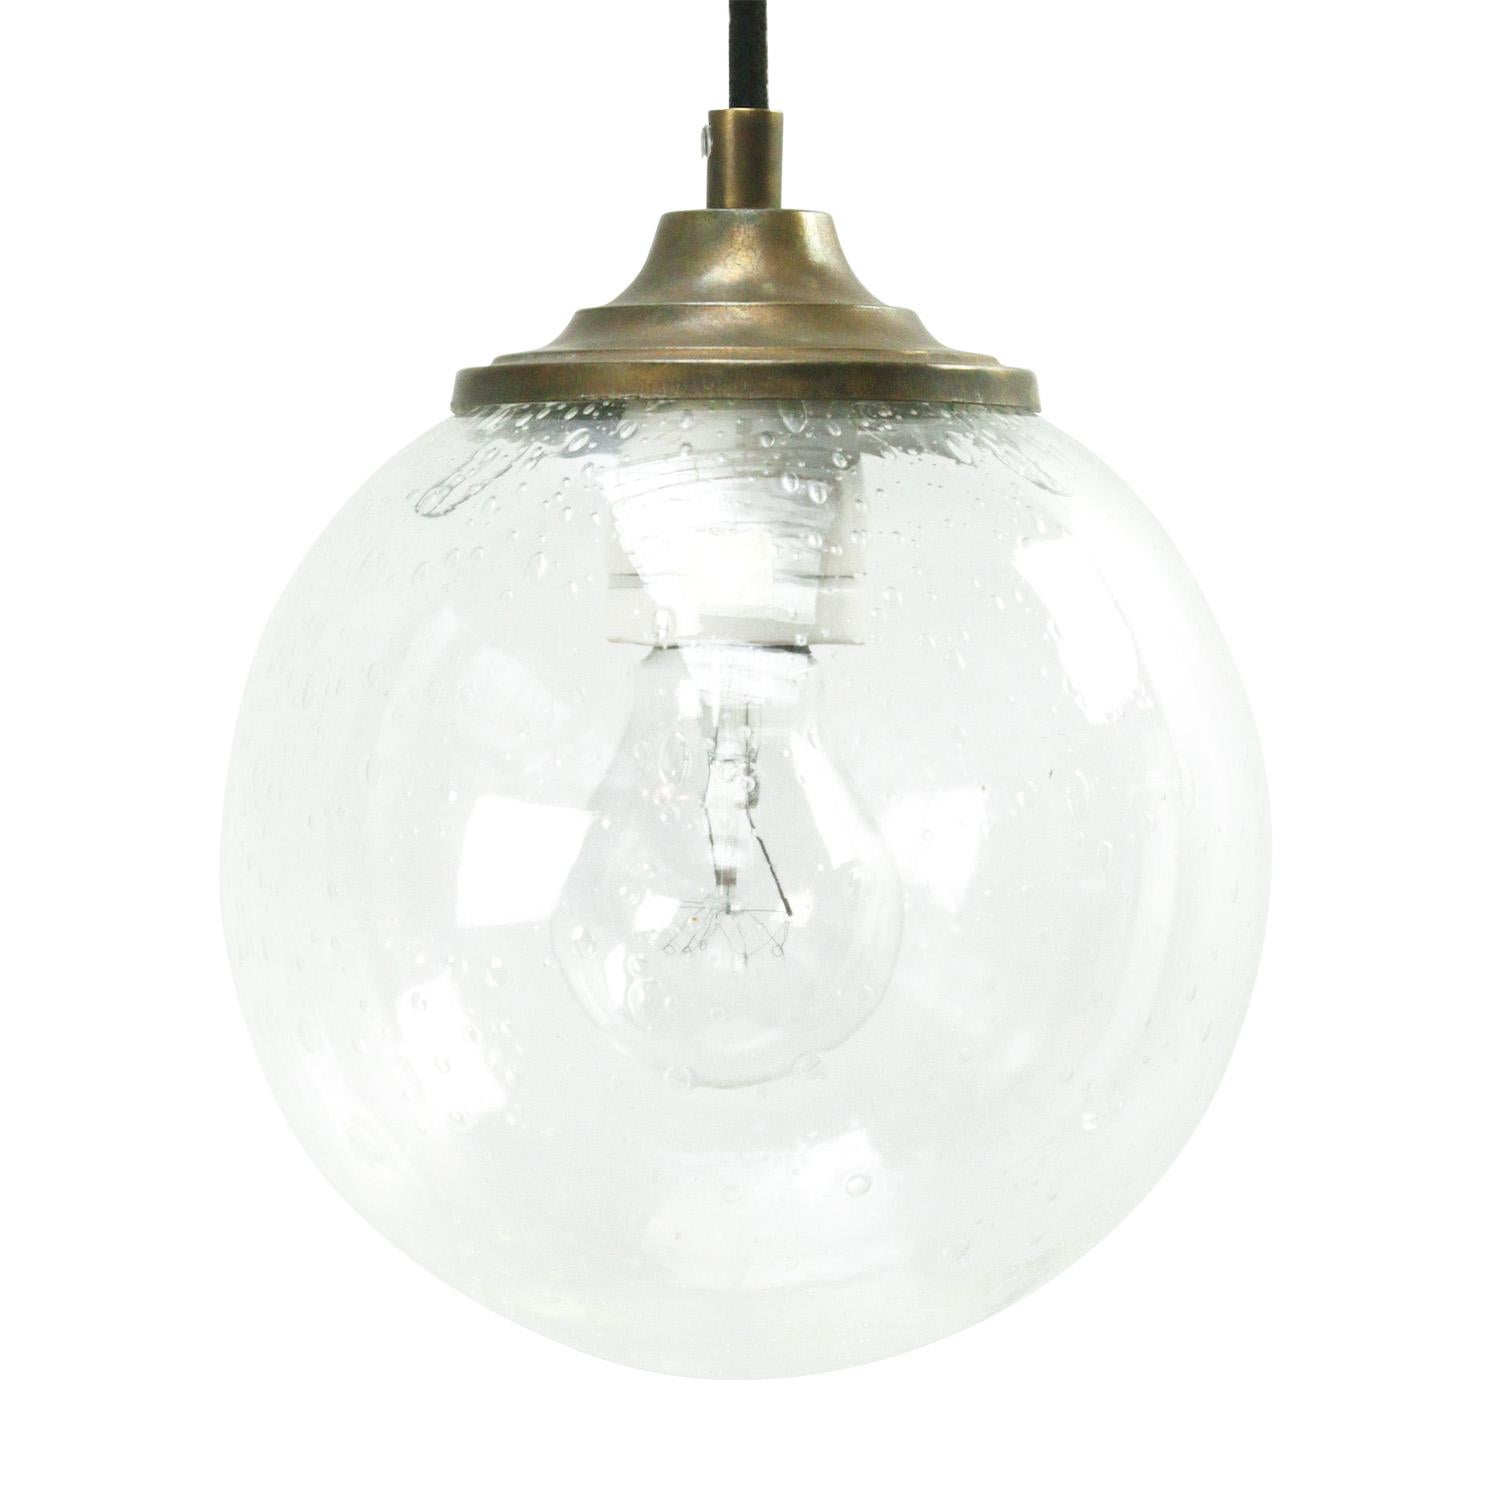 Original vintage air bubble glass pendant
2 meter black cotton flex
brass top

Weight: 0.70 kg / 1.5 lb

Priced per individual item. All lamps have been made suitable by international standards for incandescent light bulbs, energy-efficient